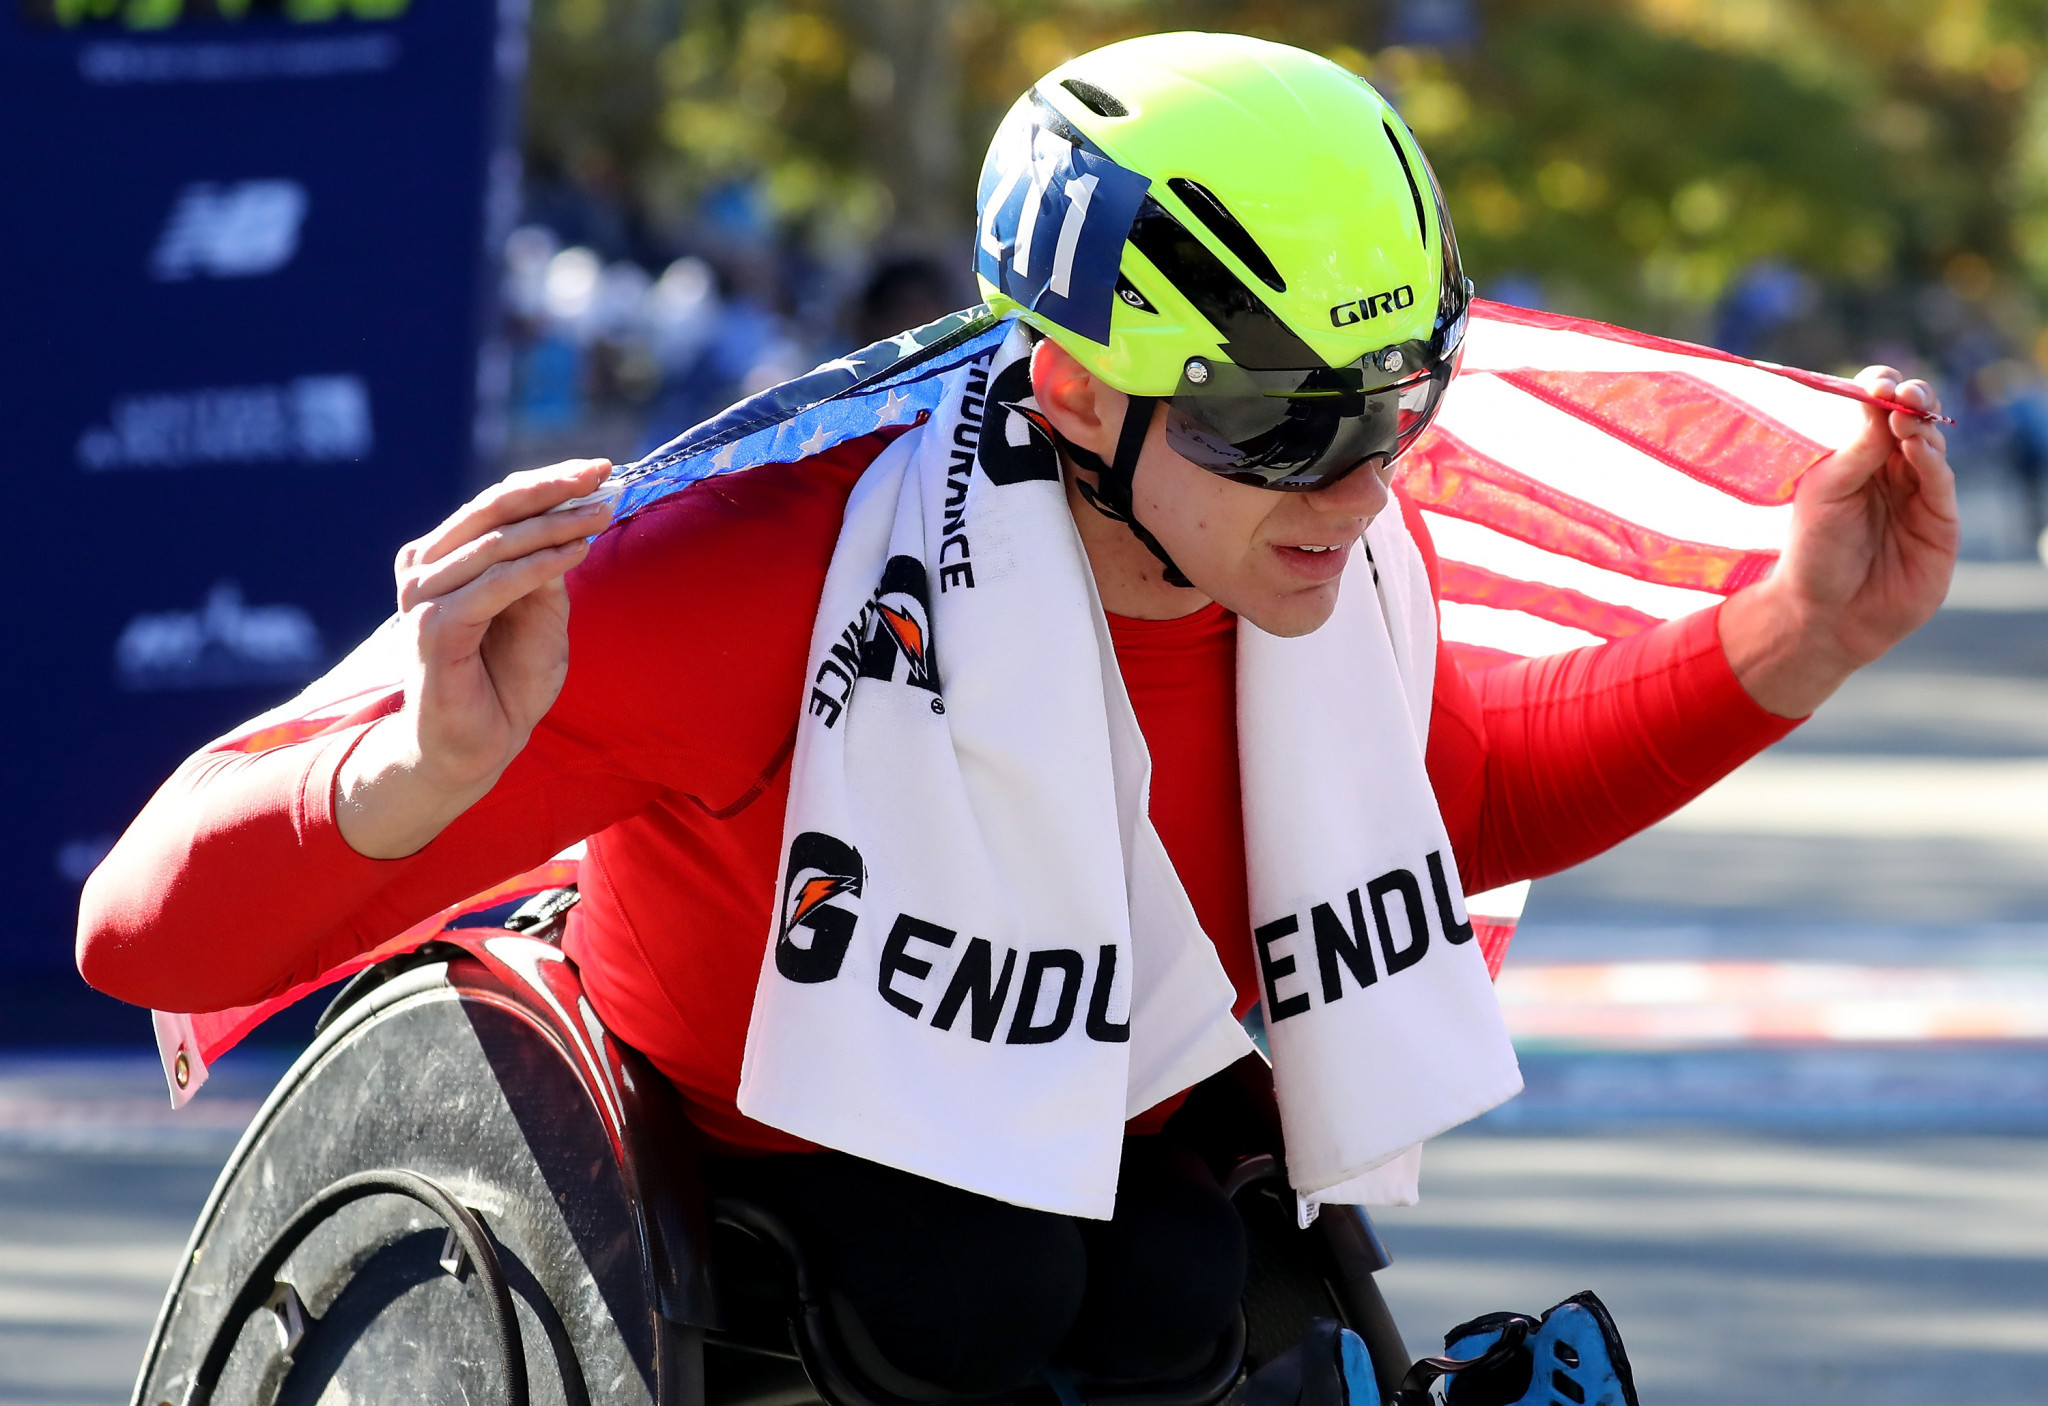 Romanchuk becomes first-ever American to win men's wheelchair crown at New York City Marathon